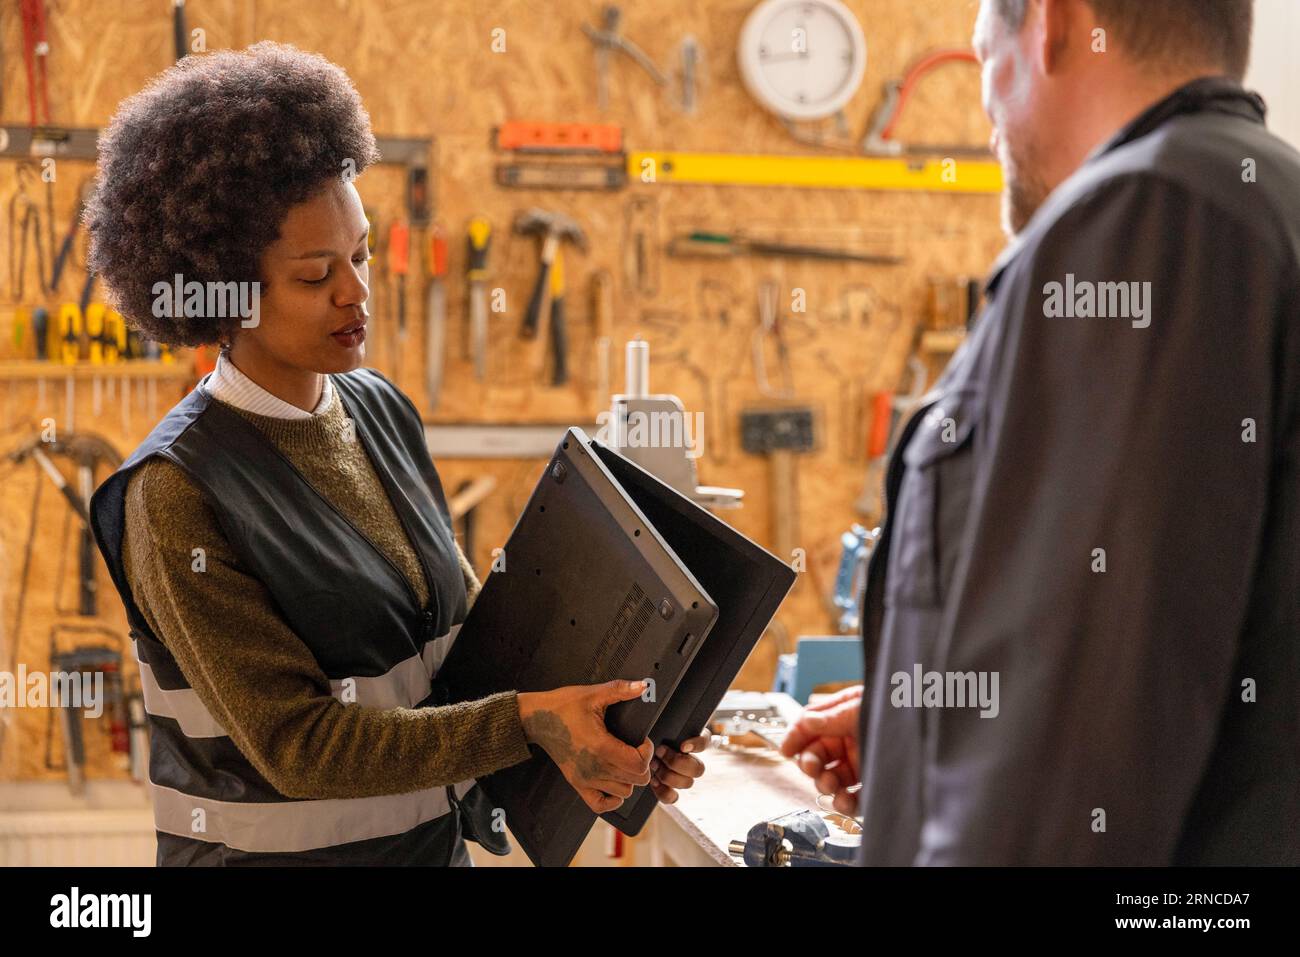 Female technician examining laptop while talking to customer at recycling center Stock Photo